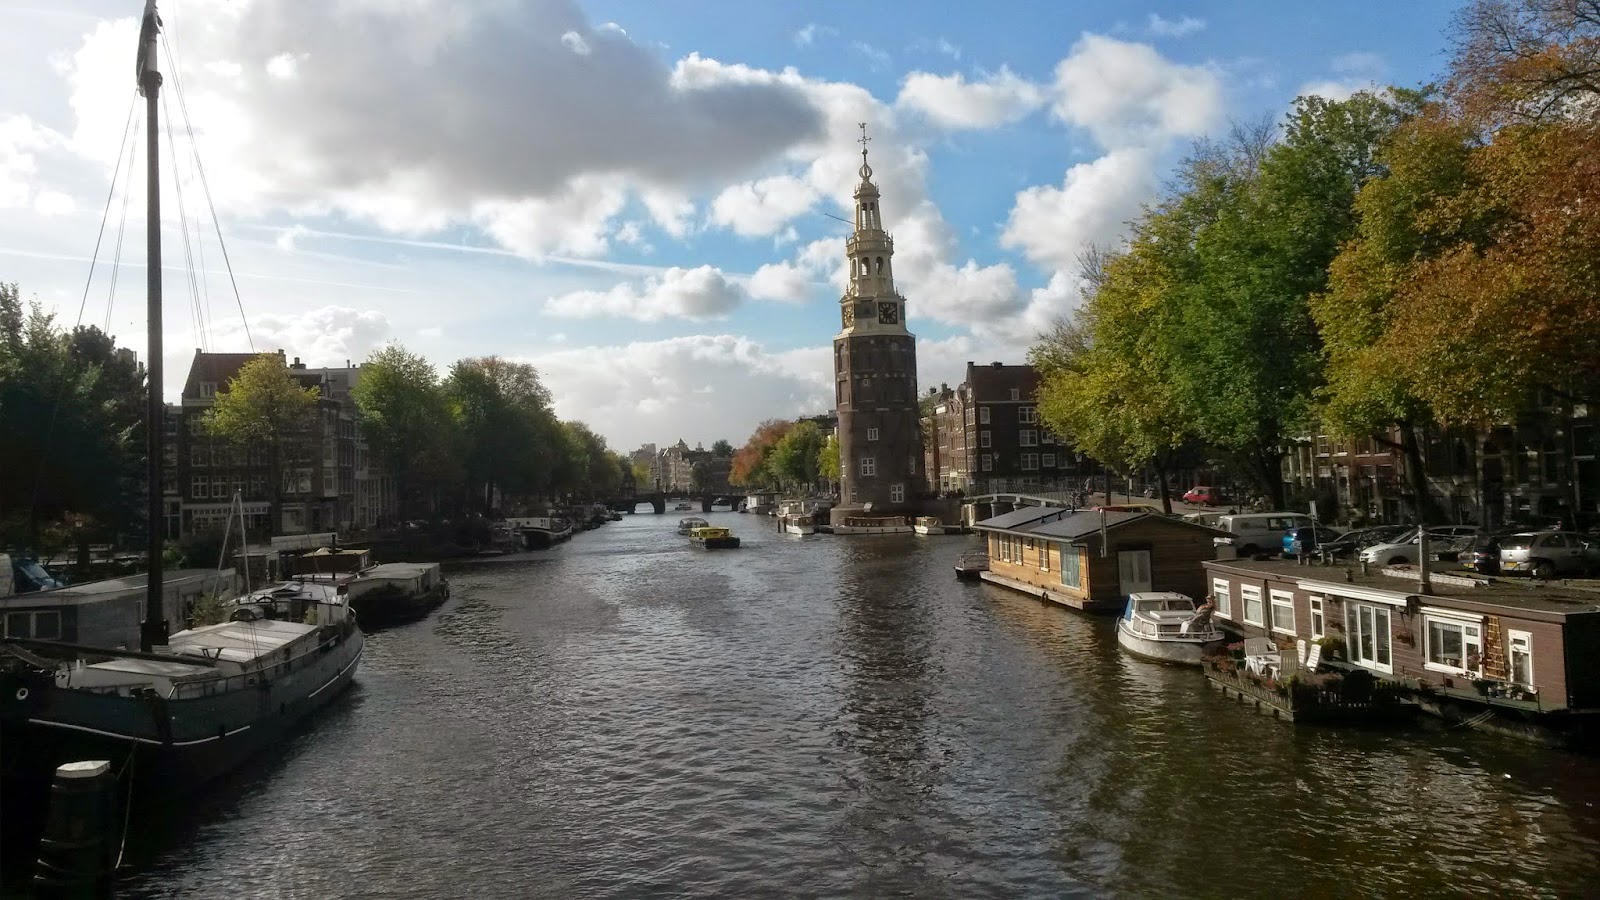 AMSTERDAM TOURIST INFO, Travel Guide Amsterdam: What are the best